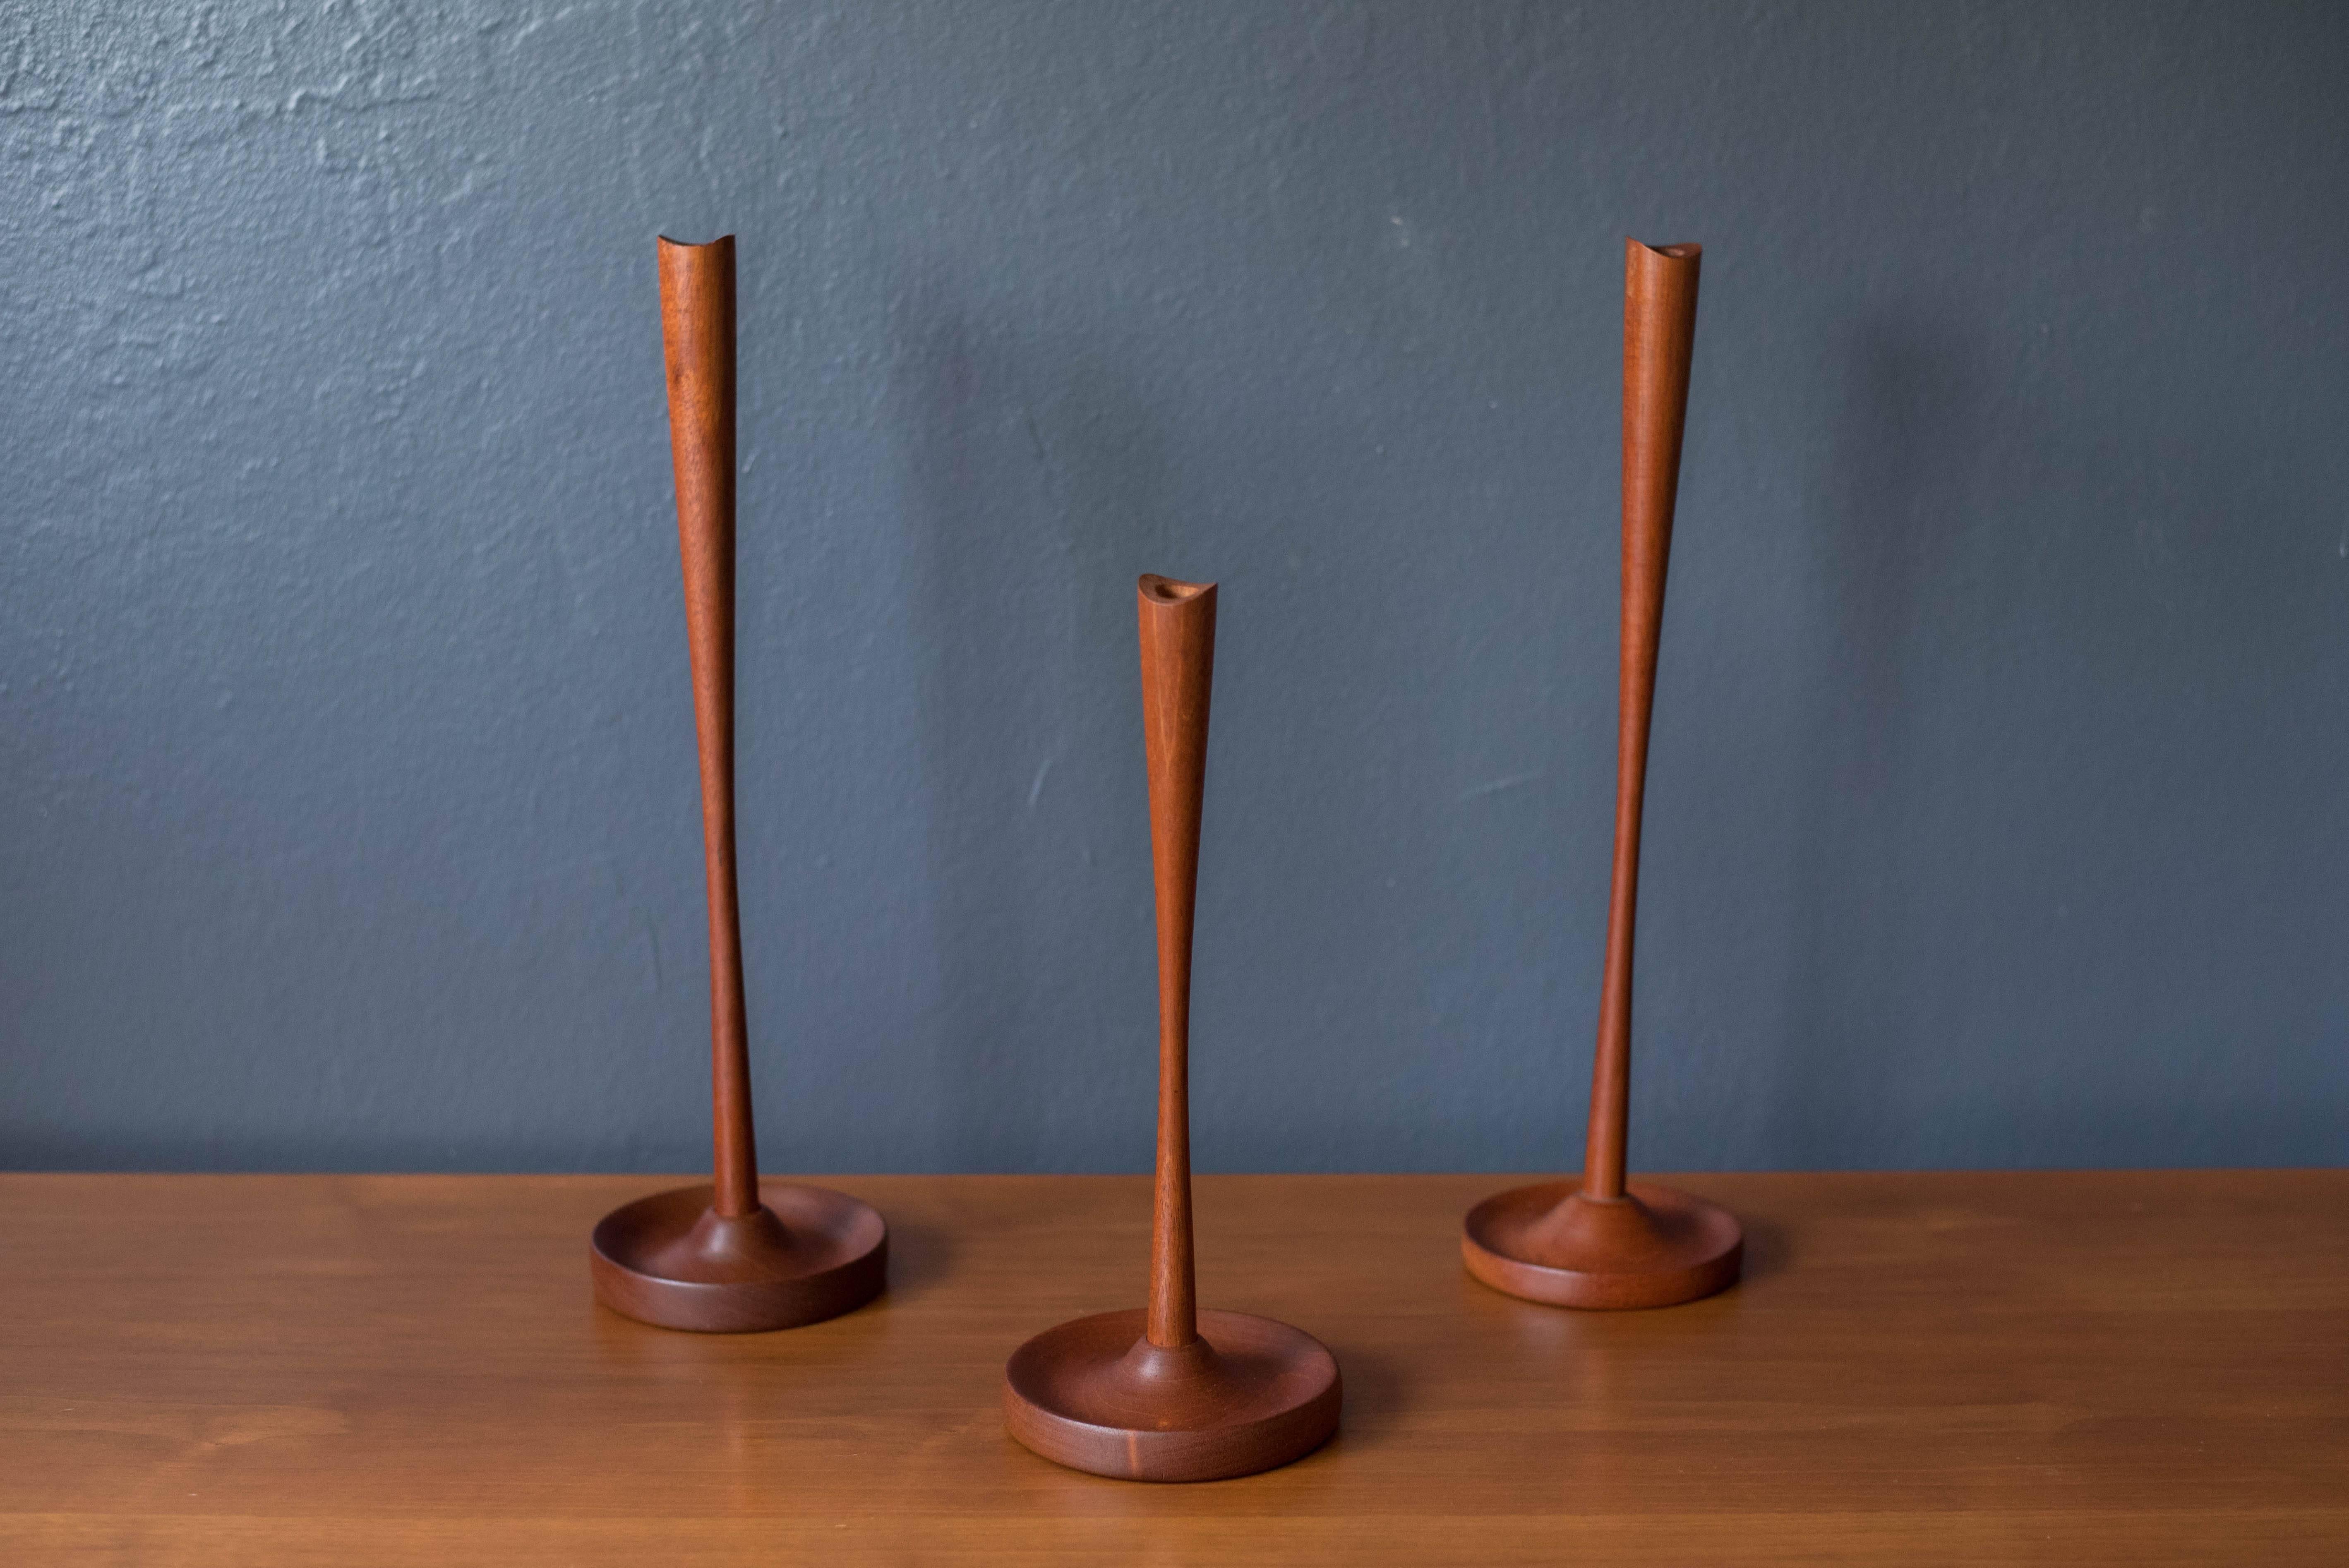 Mid-Century Modern candleholders in solid teak. This set has a unique carved shape and displays well with any modern decor. Price is for the set of three. 
 
Dimensions: 4